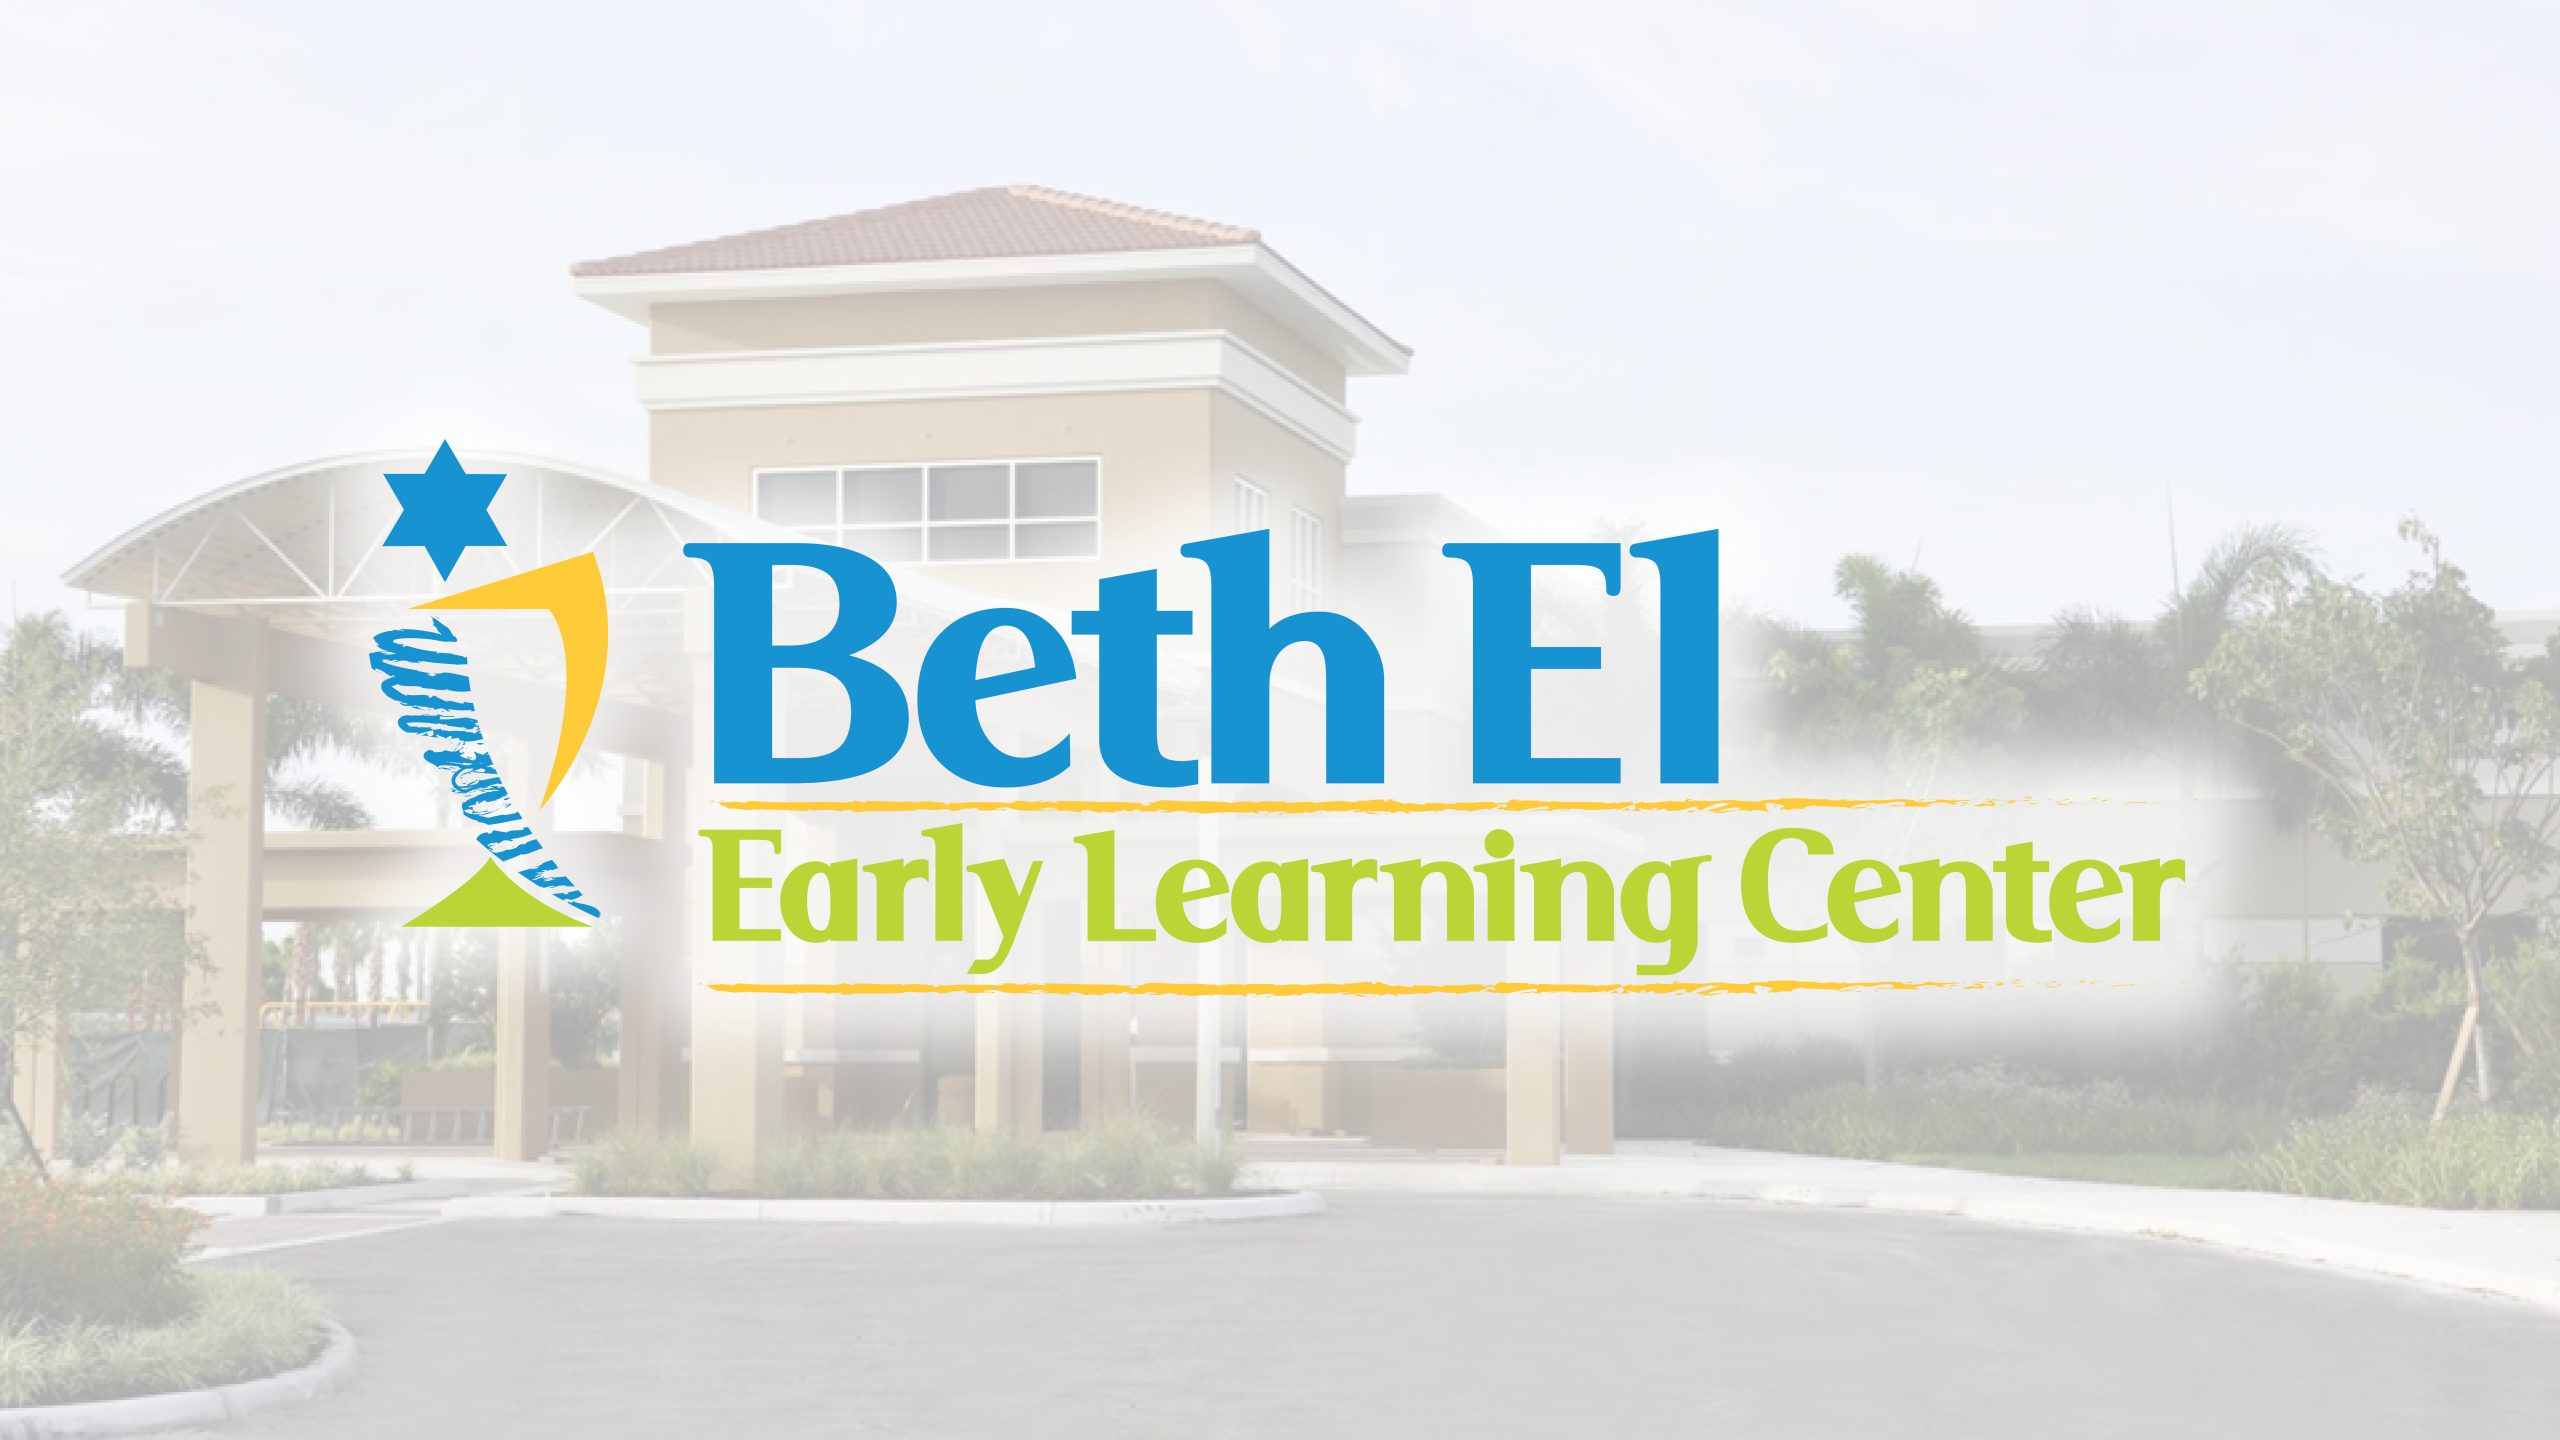 Beth El Early Learning Center logo with building background